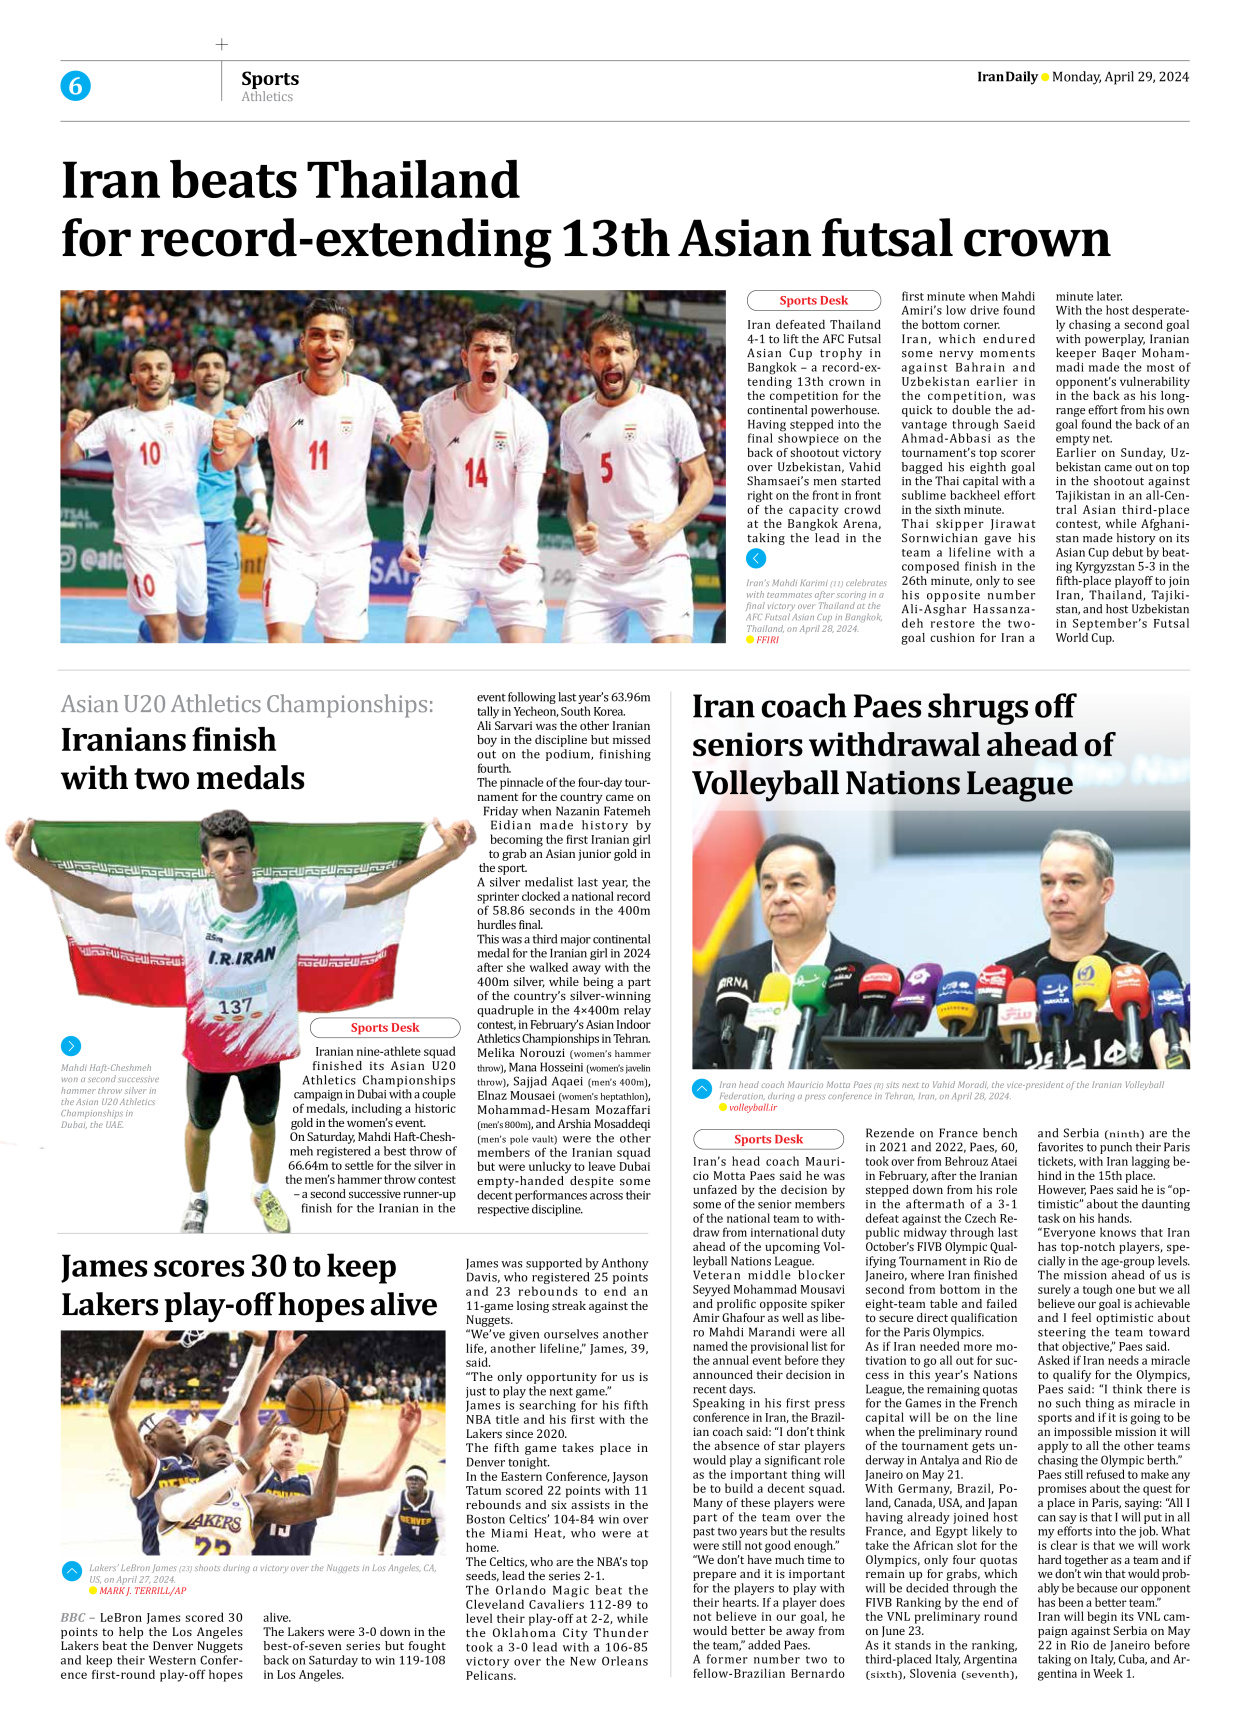 Iran Daily - Number Seven Thousand Five Hundred and Forty Five - 29 April 2024 - Page 6